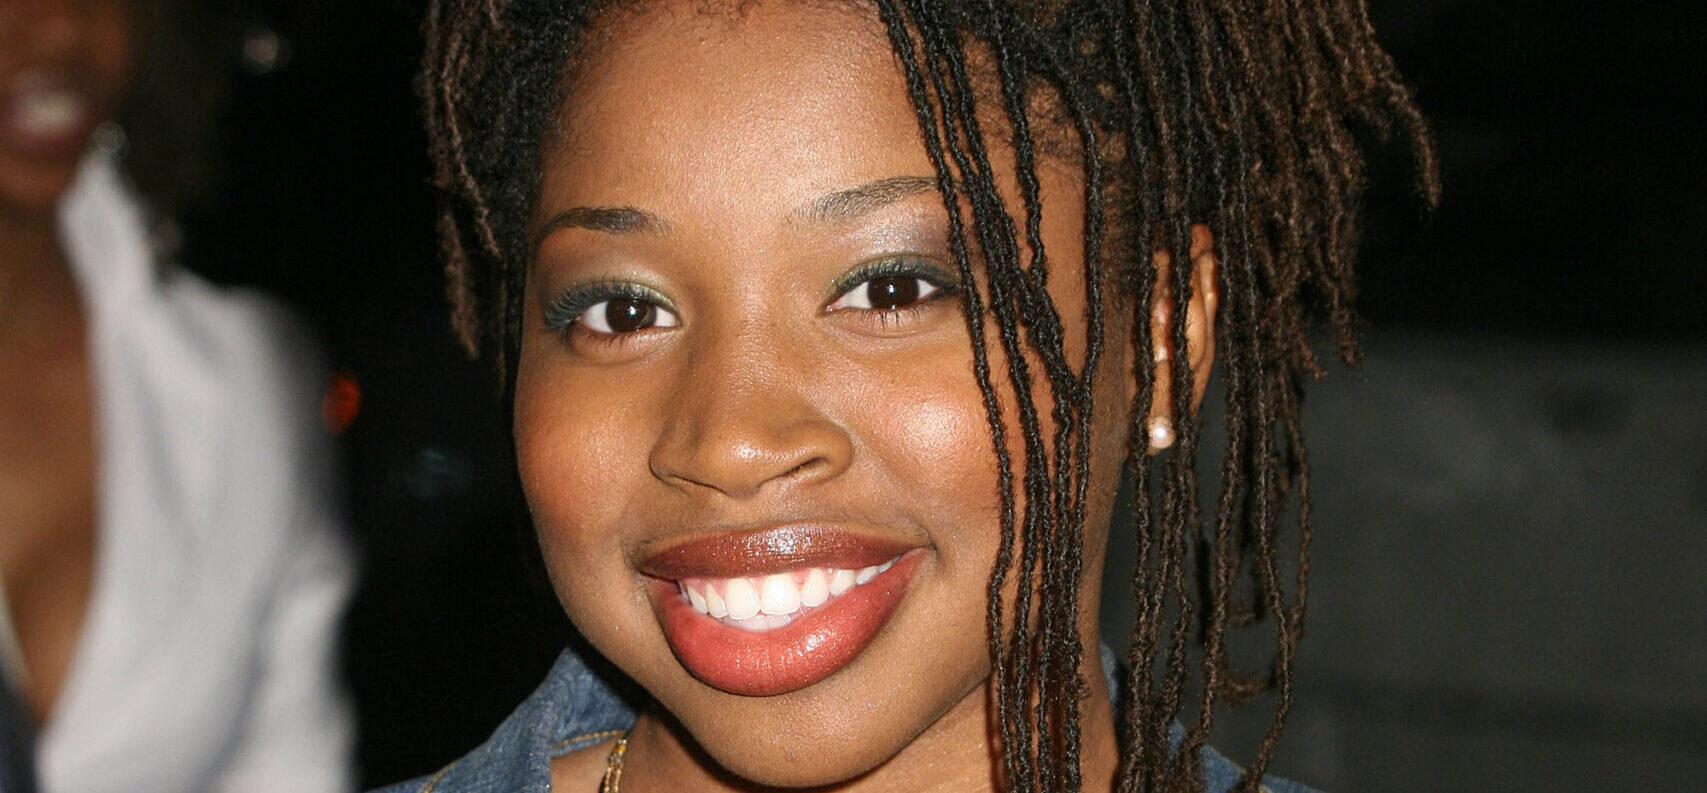 ‘All That’ Star Claims ‘We Would Choke’ On Sugar While At Nickelodeon